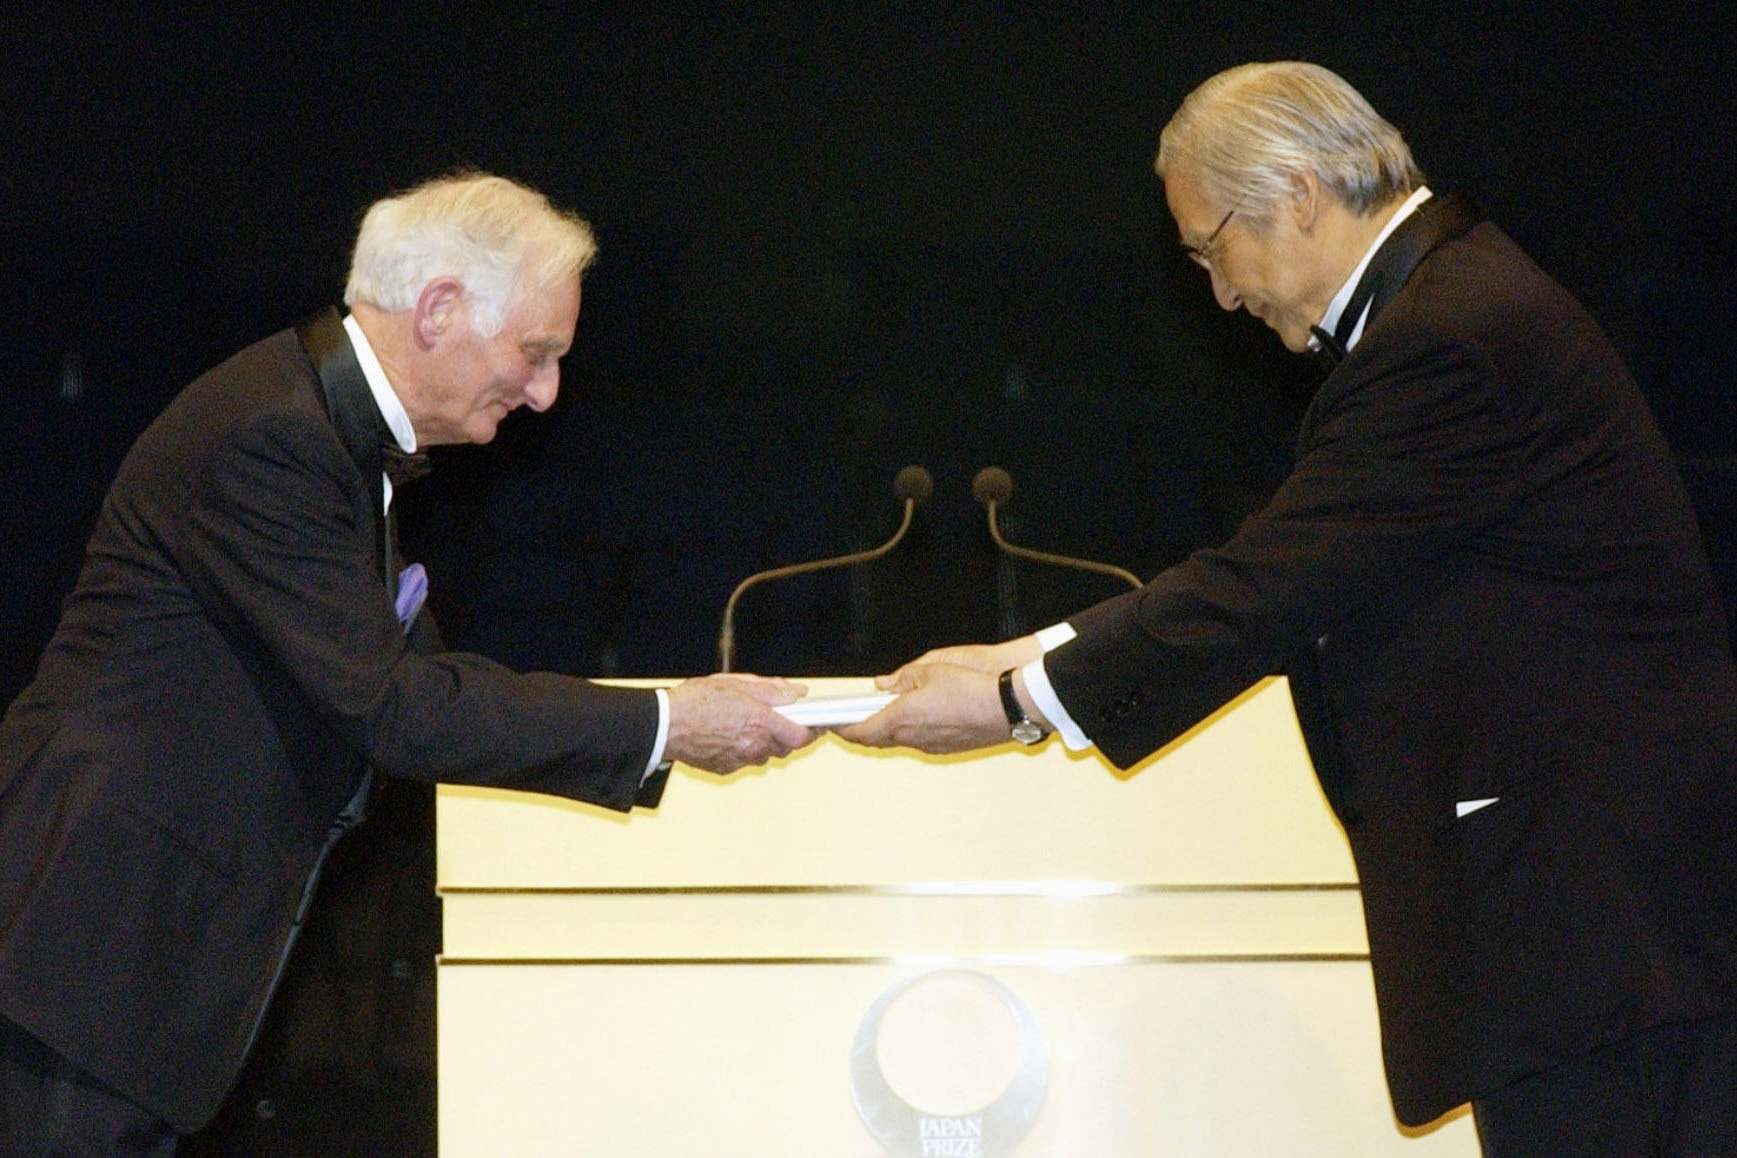 Sir John Houghton (left) collecting the Japan Prize in 2006